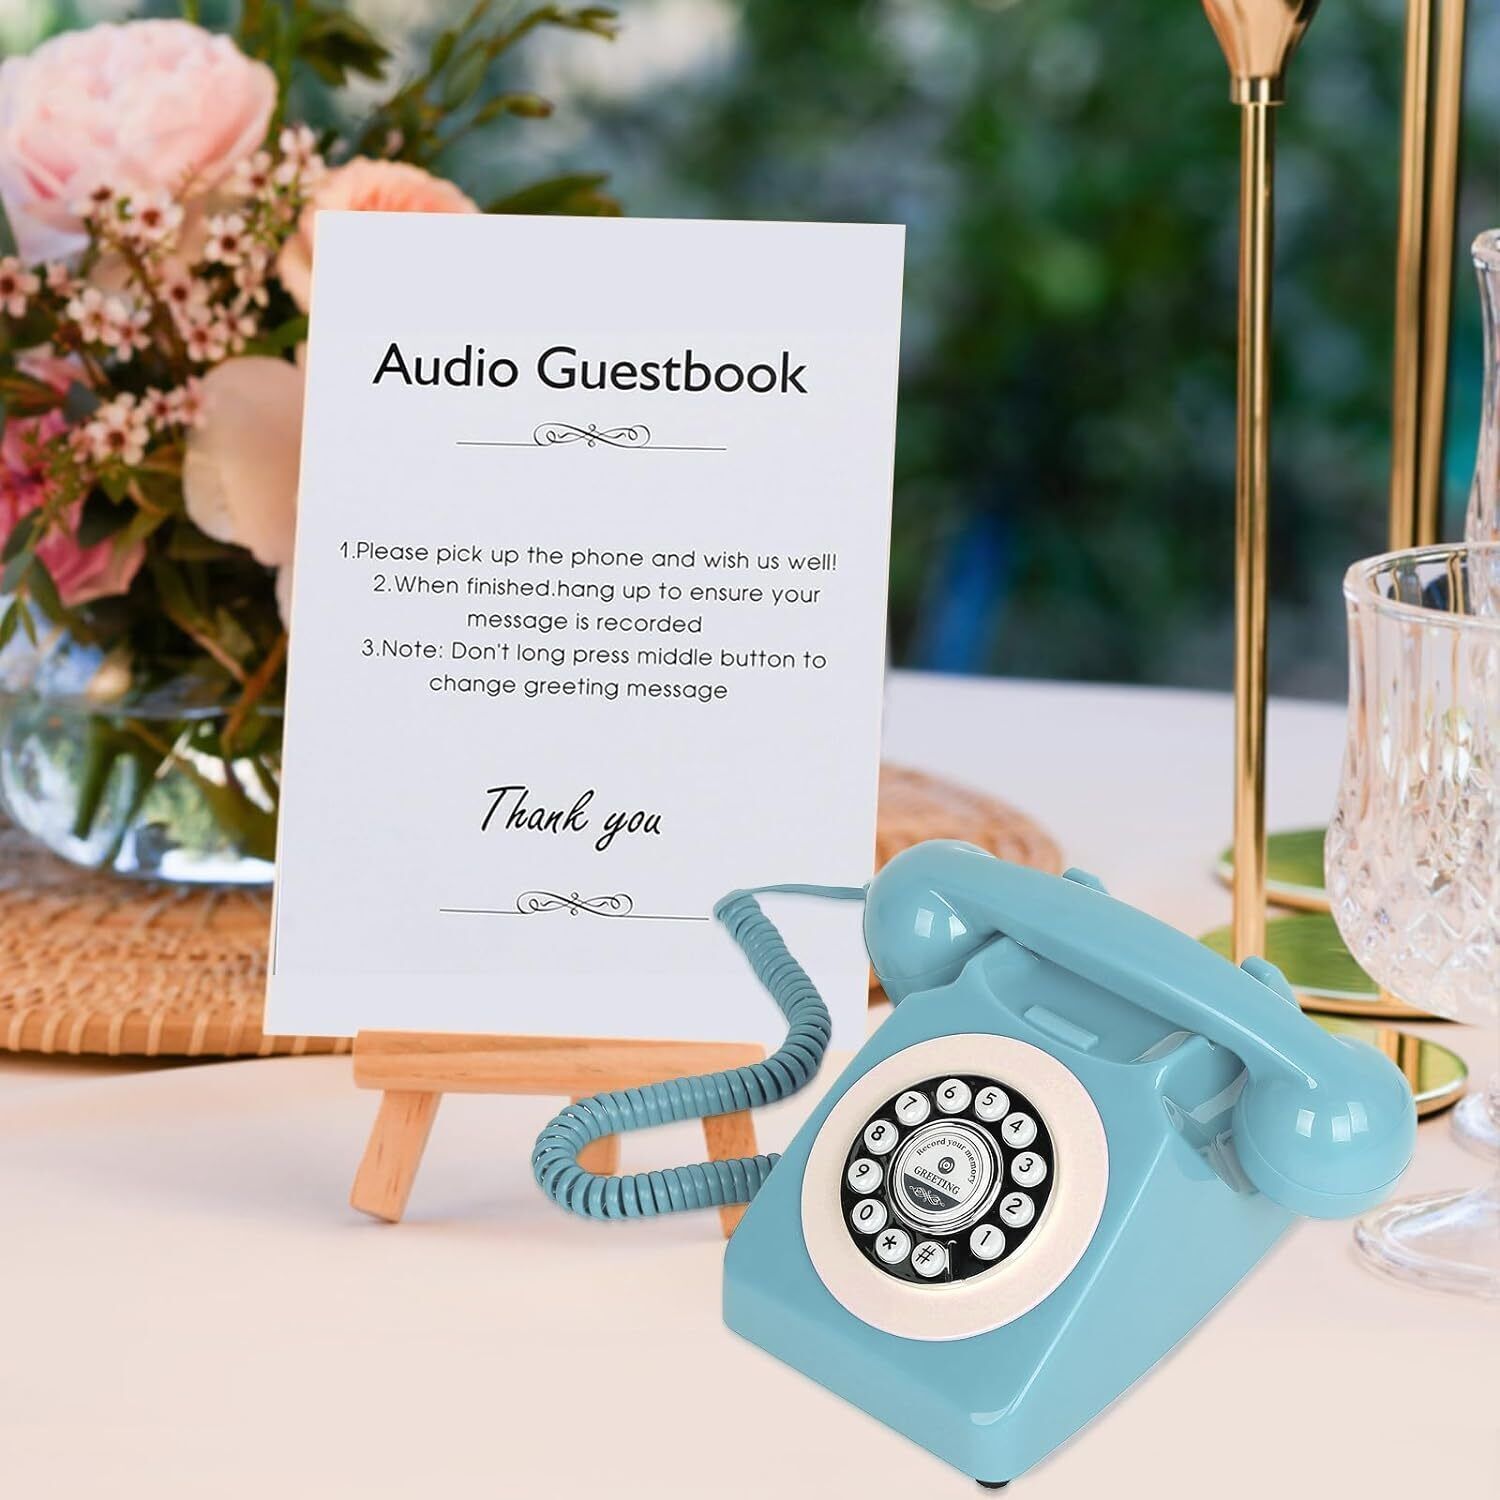 Audio Guest Book  for Weddings Birthdays Rentals Confessions Phone Record